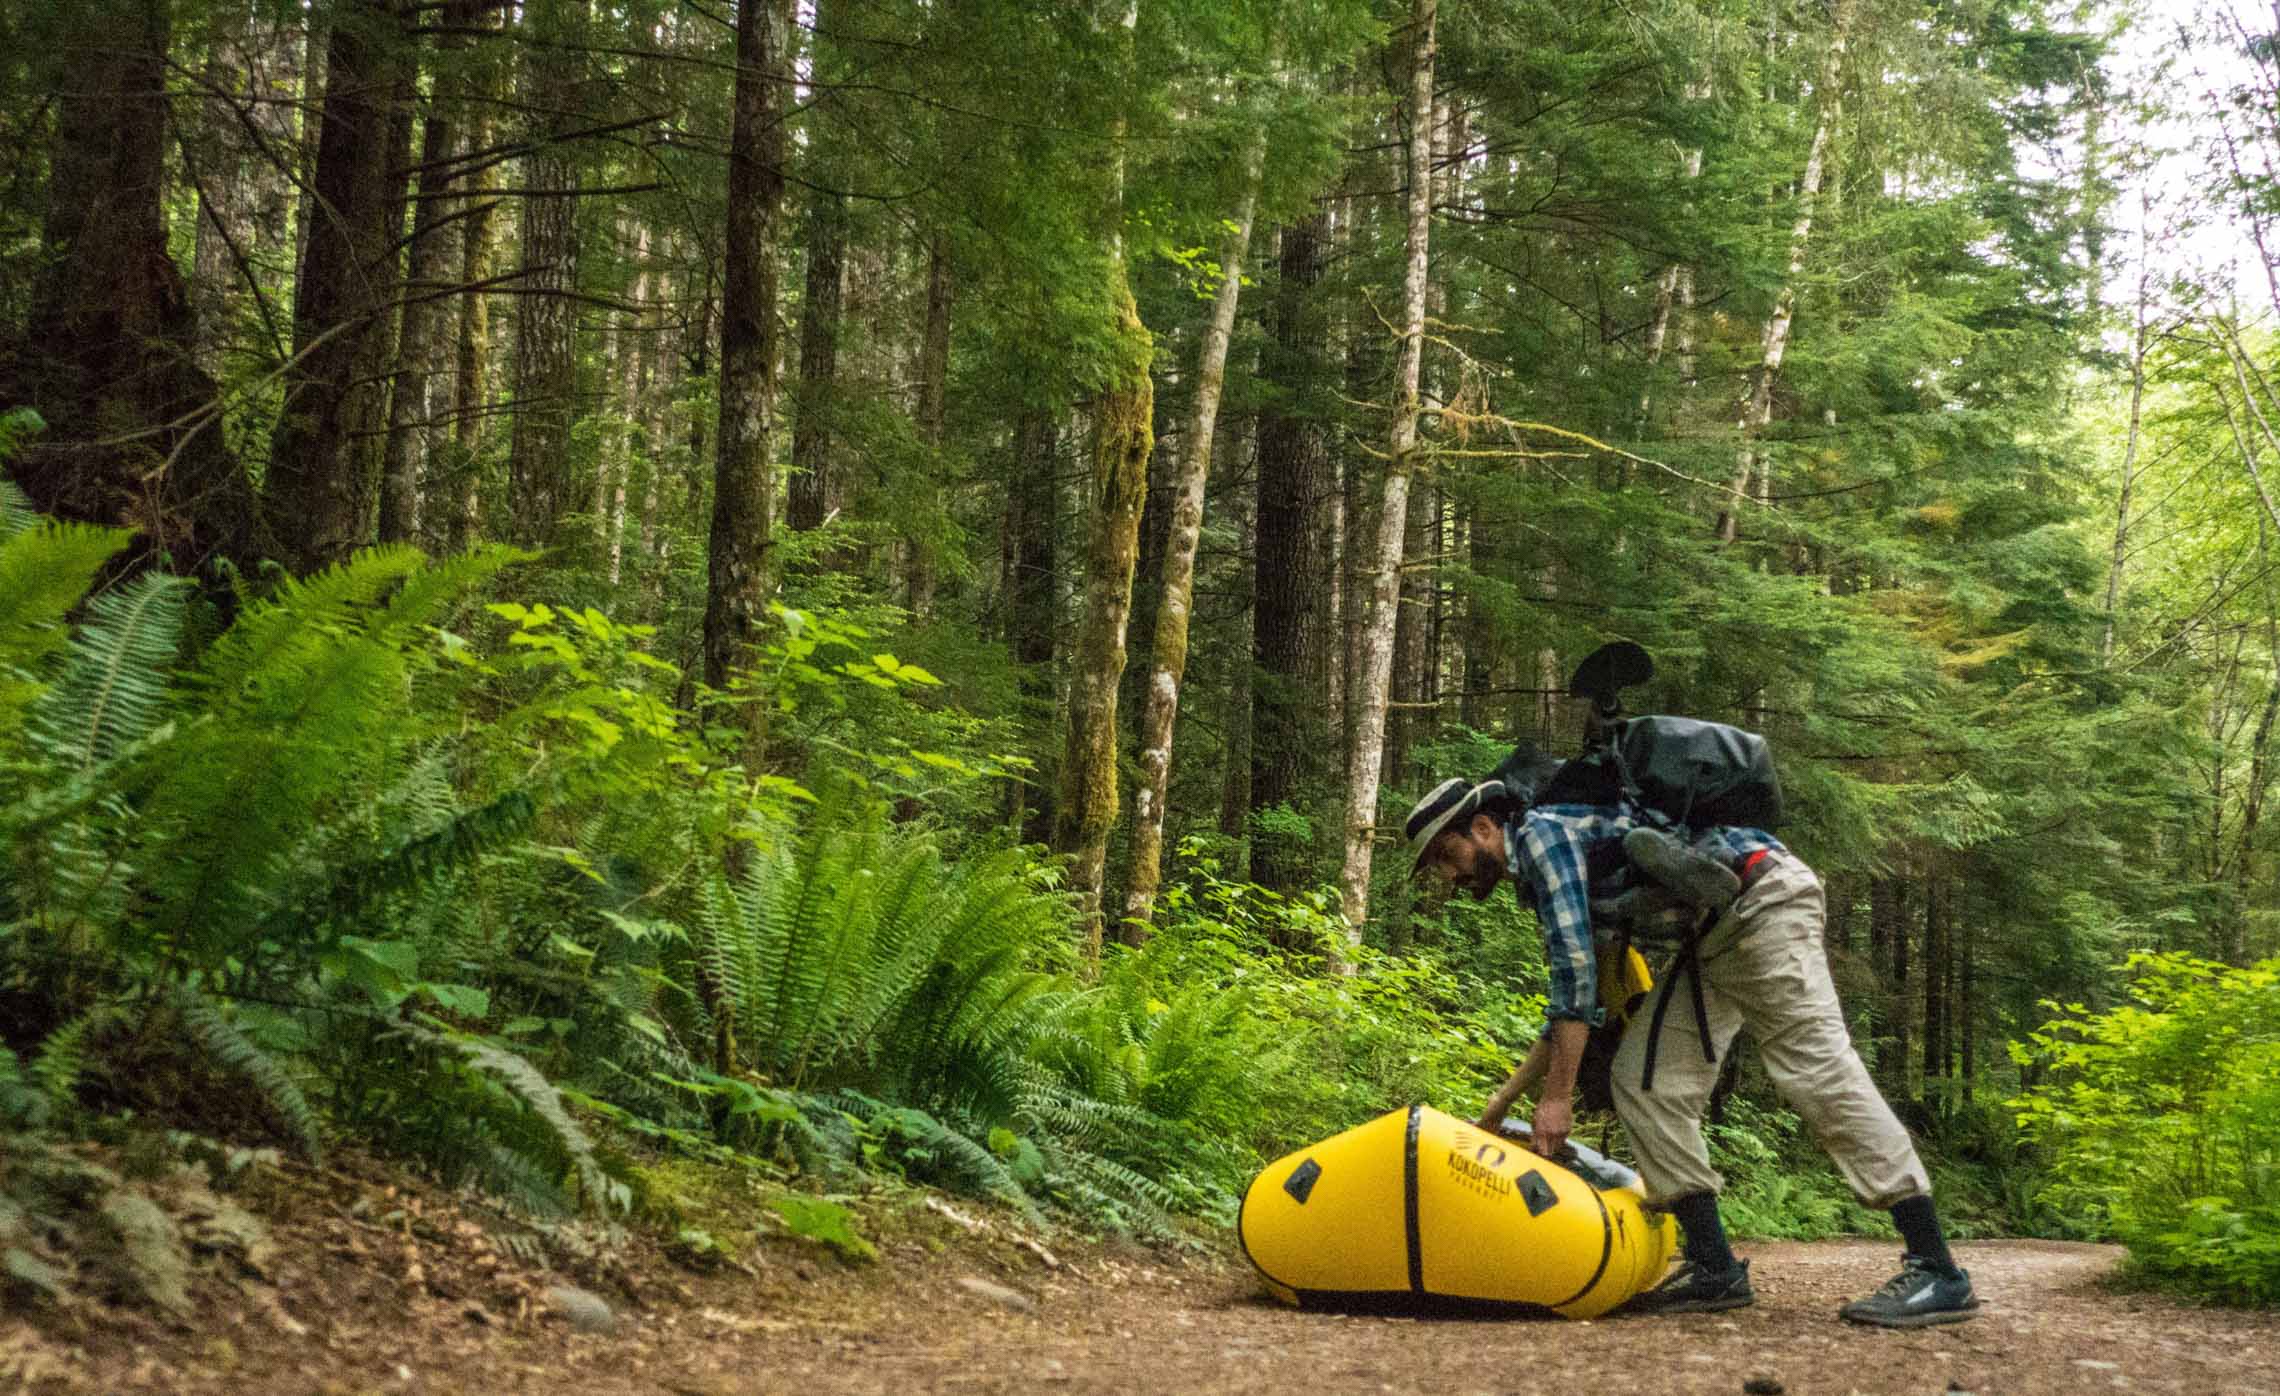 Packrafting opens your world to new adventures. Why Packraft Kokopelli